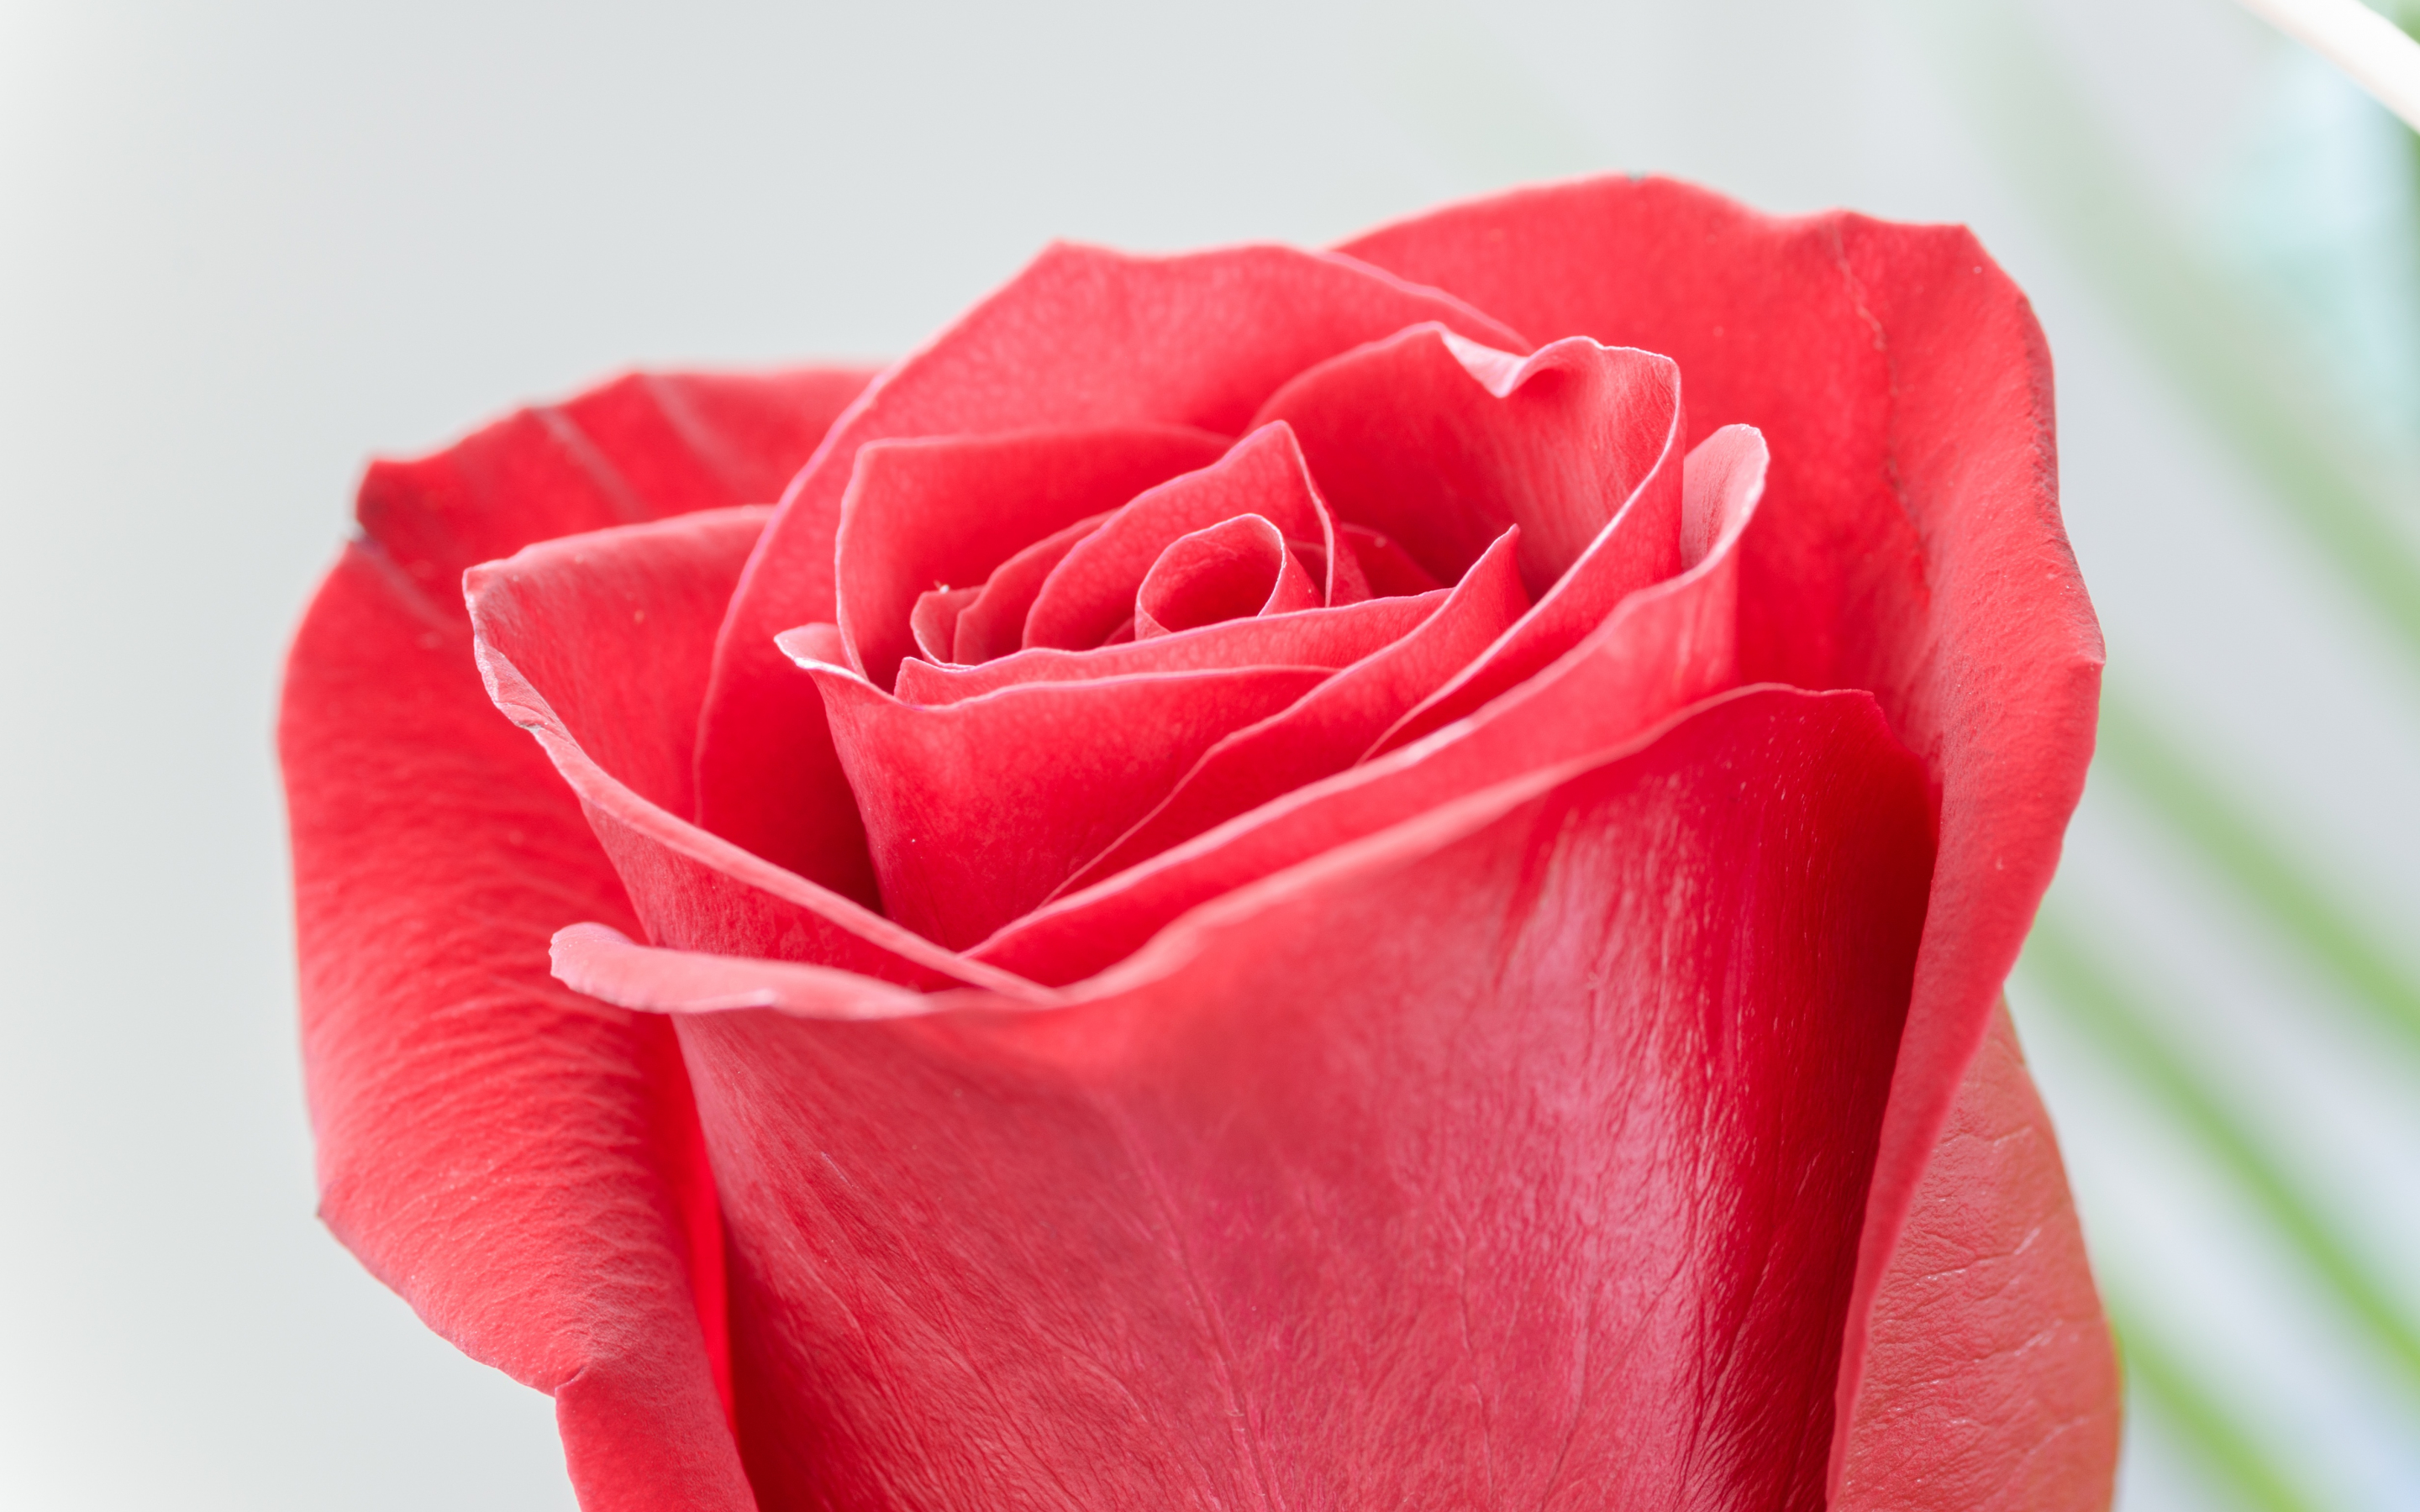 Red rose, flower, close up, bud, 2880x1800 wallpaper